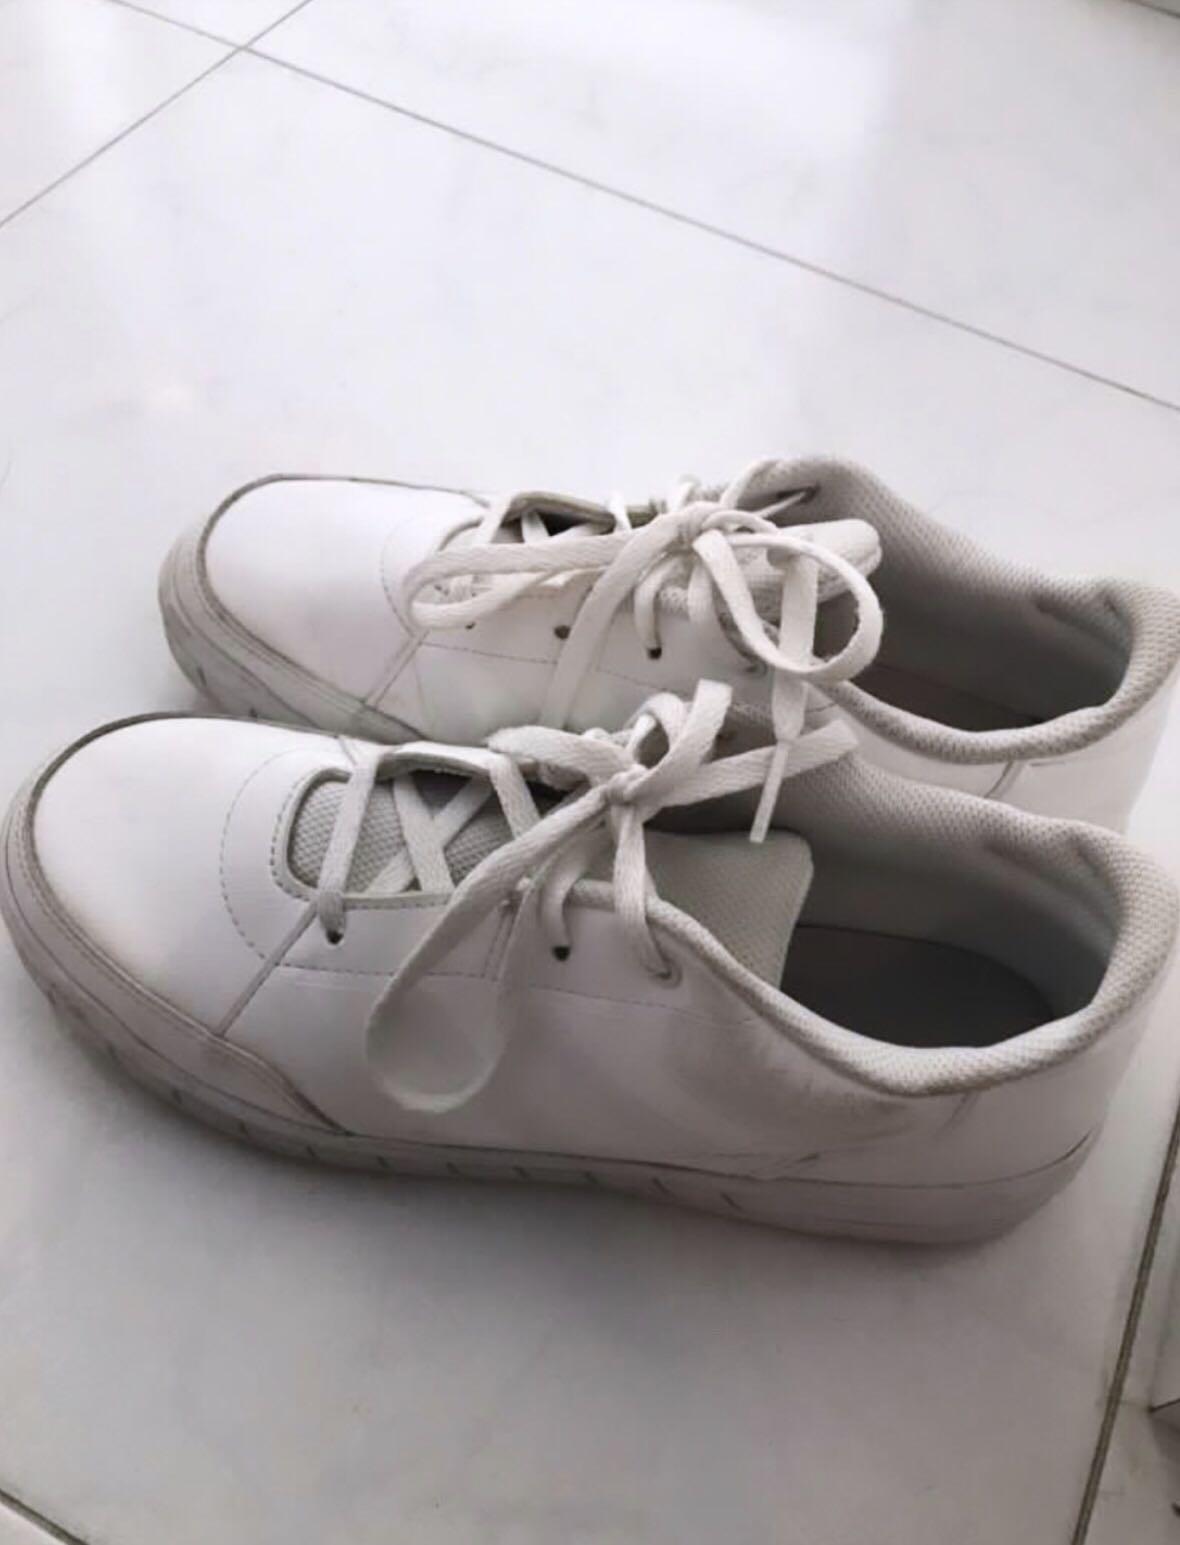 adidas white school shoes with laces